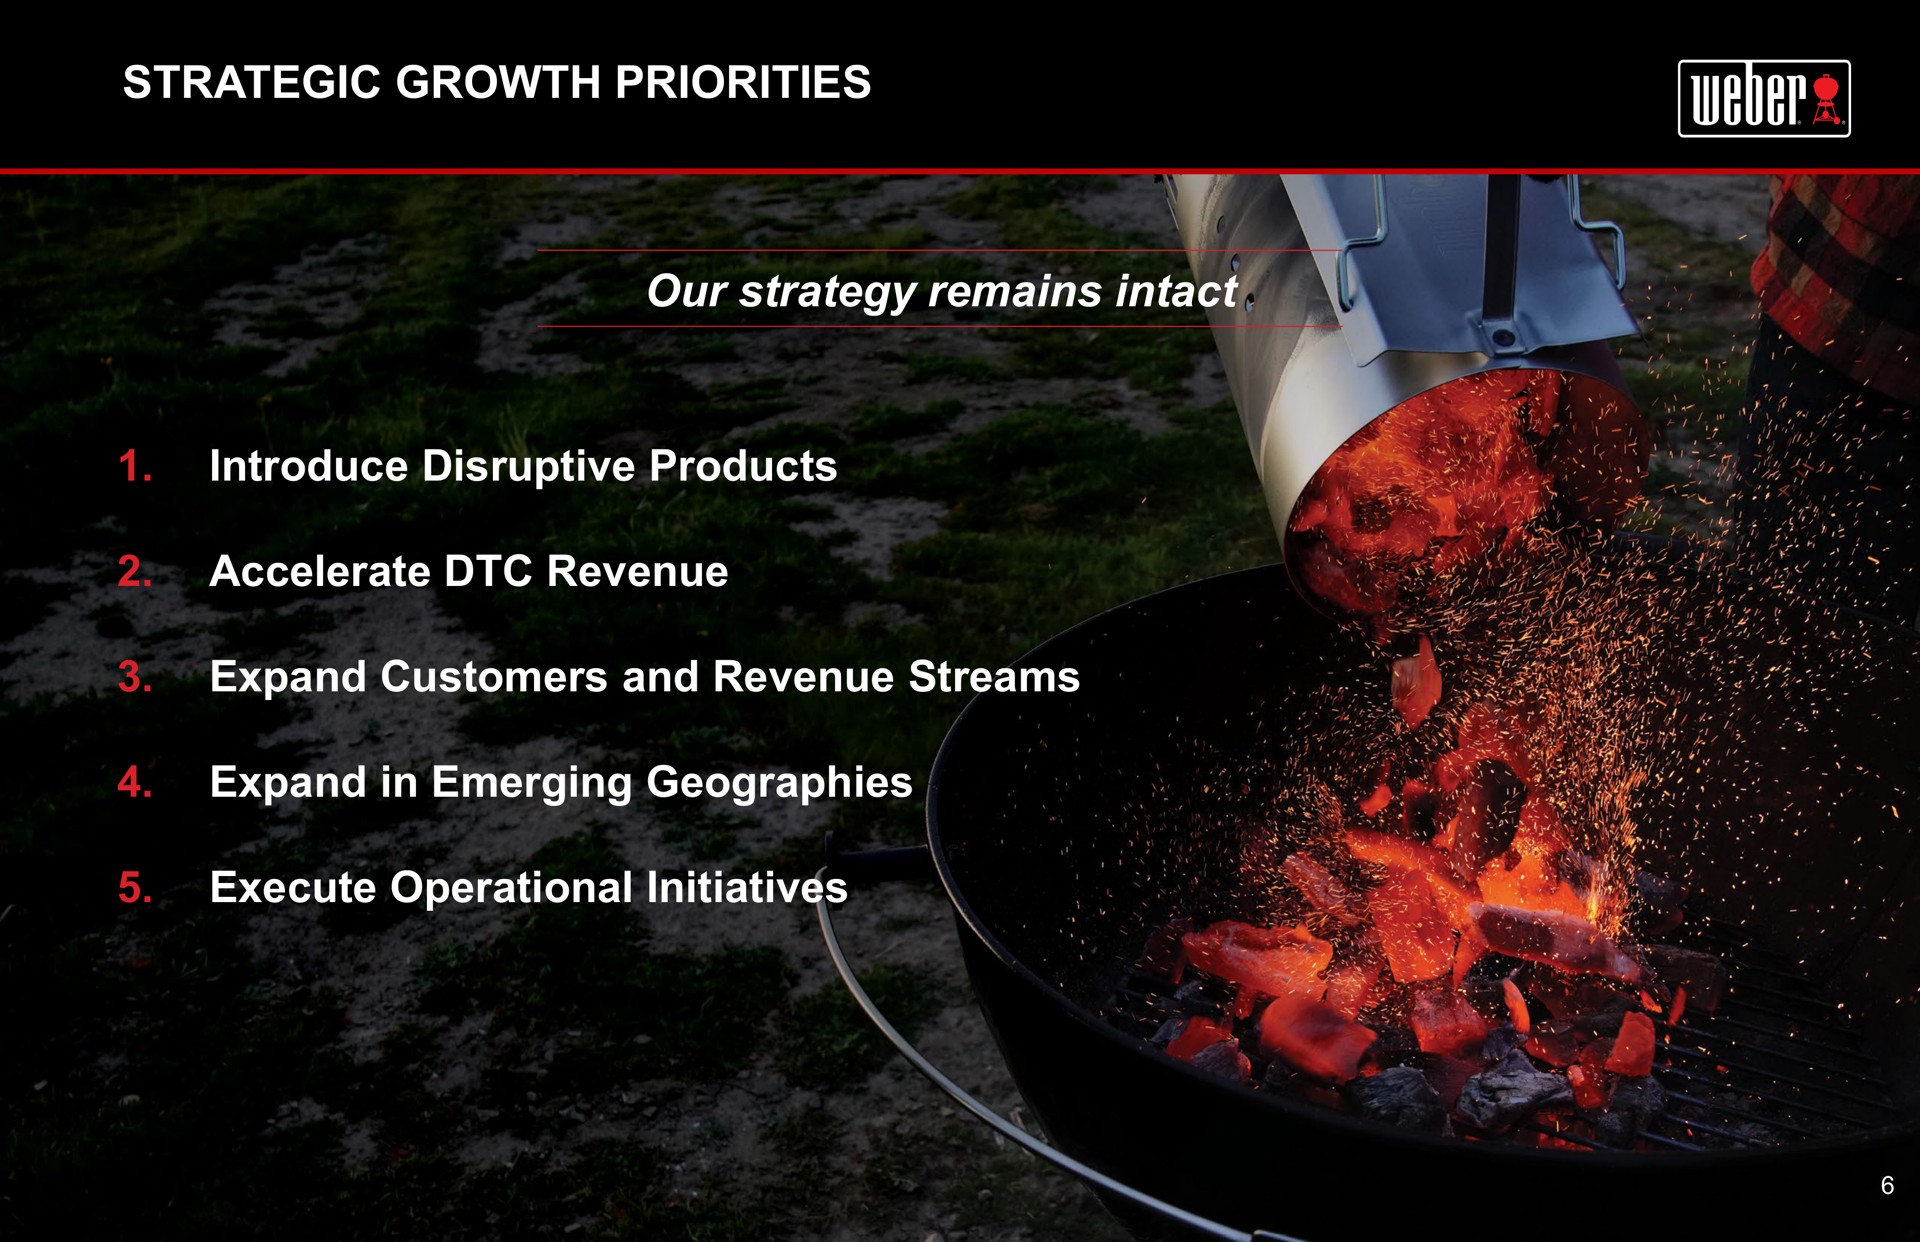 strategic growth priorities our strategy remains intact introduce disruptive products accelerate revenue expand customers and revenue streams expand in emerging geographies execute operational initiatives toke aloe so me | Weber